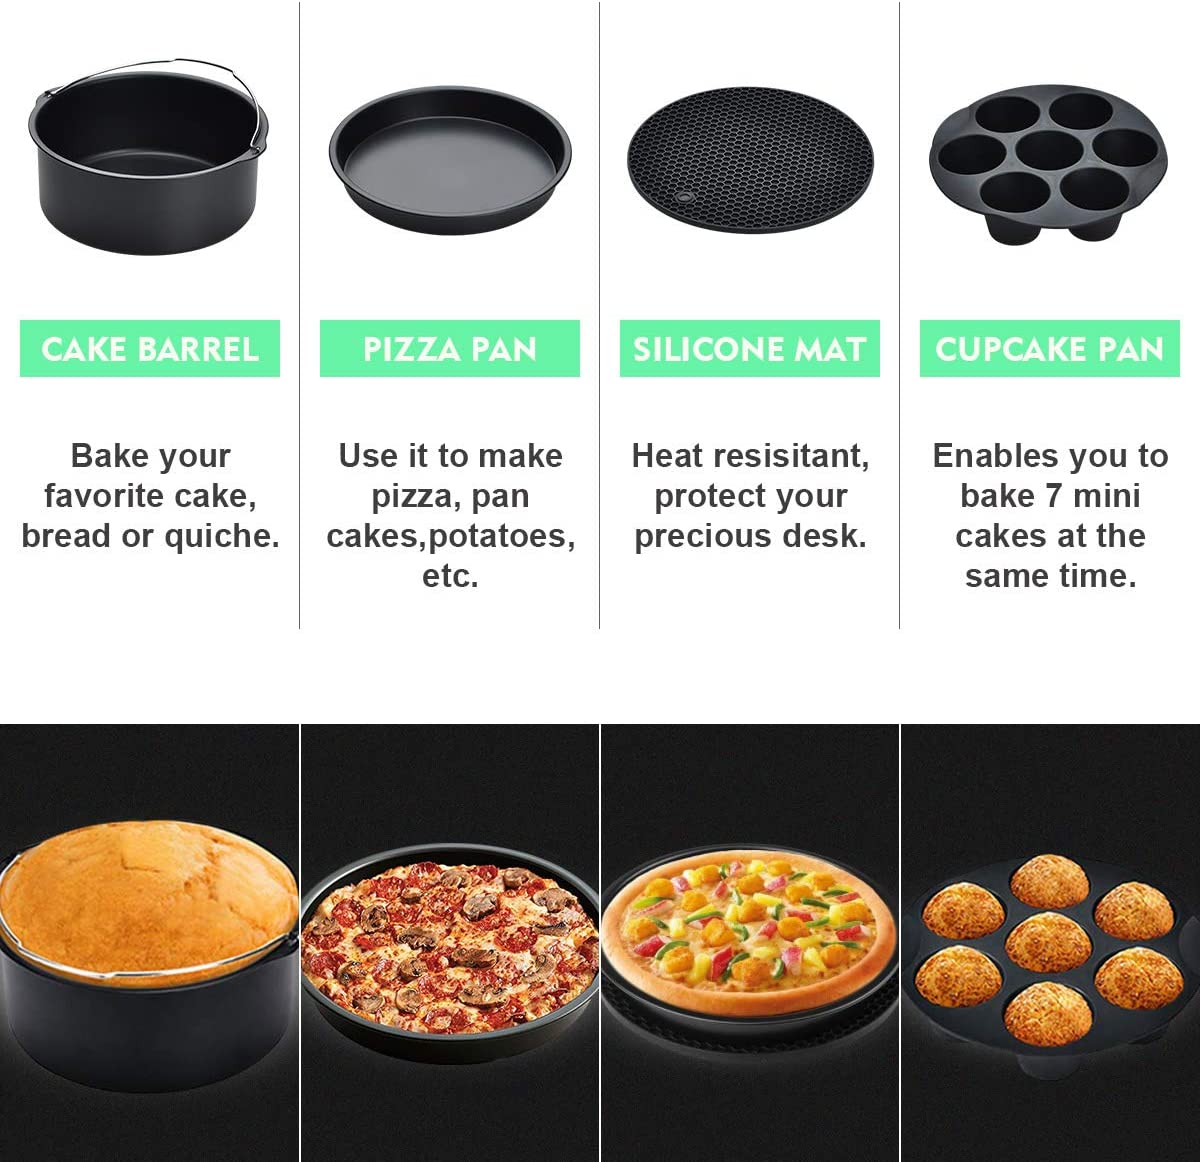 Pizza Pan,Skewer Rack,Patty paper 100pc CrownVirt Air Fryer Accessories Set of 12 Fit All 4.2Qt-5.8Qt Air Fryers,With 7 Inch Cake Pan .Non stick pot,Safe And Harmless,Can Put in Dishwasher -Black.